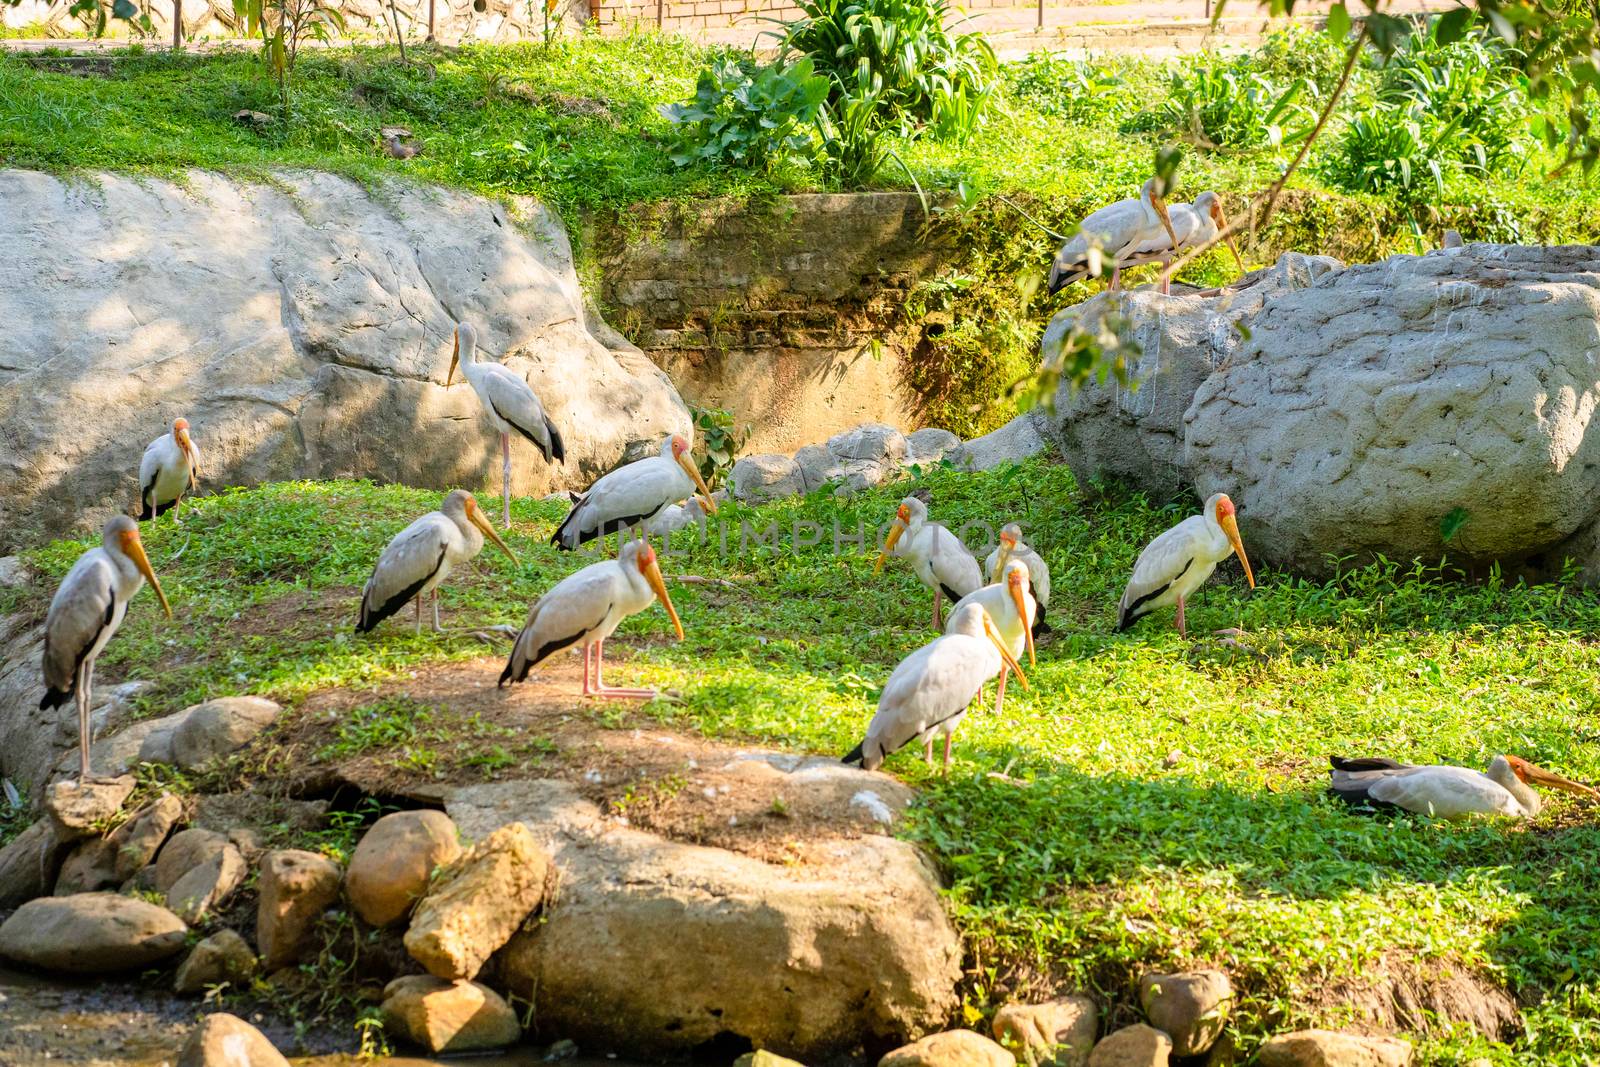 A flock of milk storks sits on a green lawn in a park.